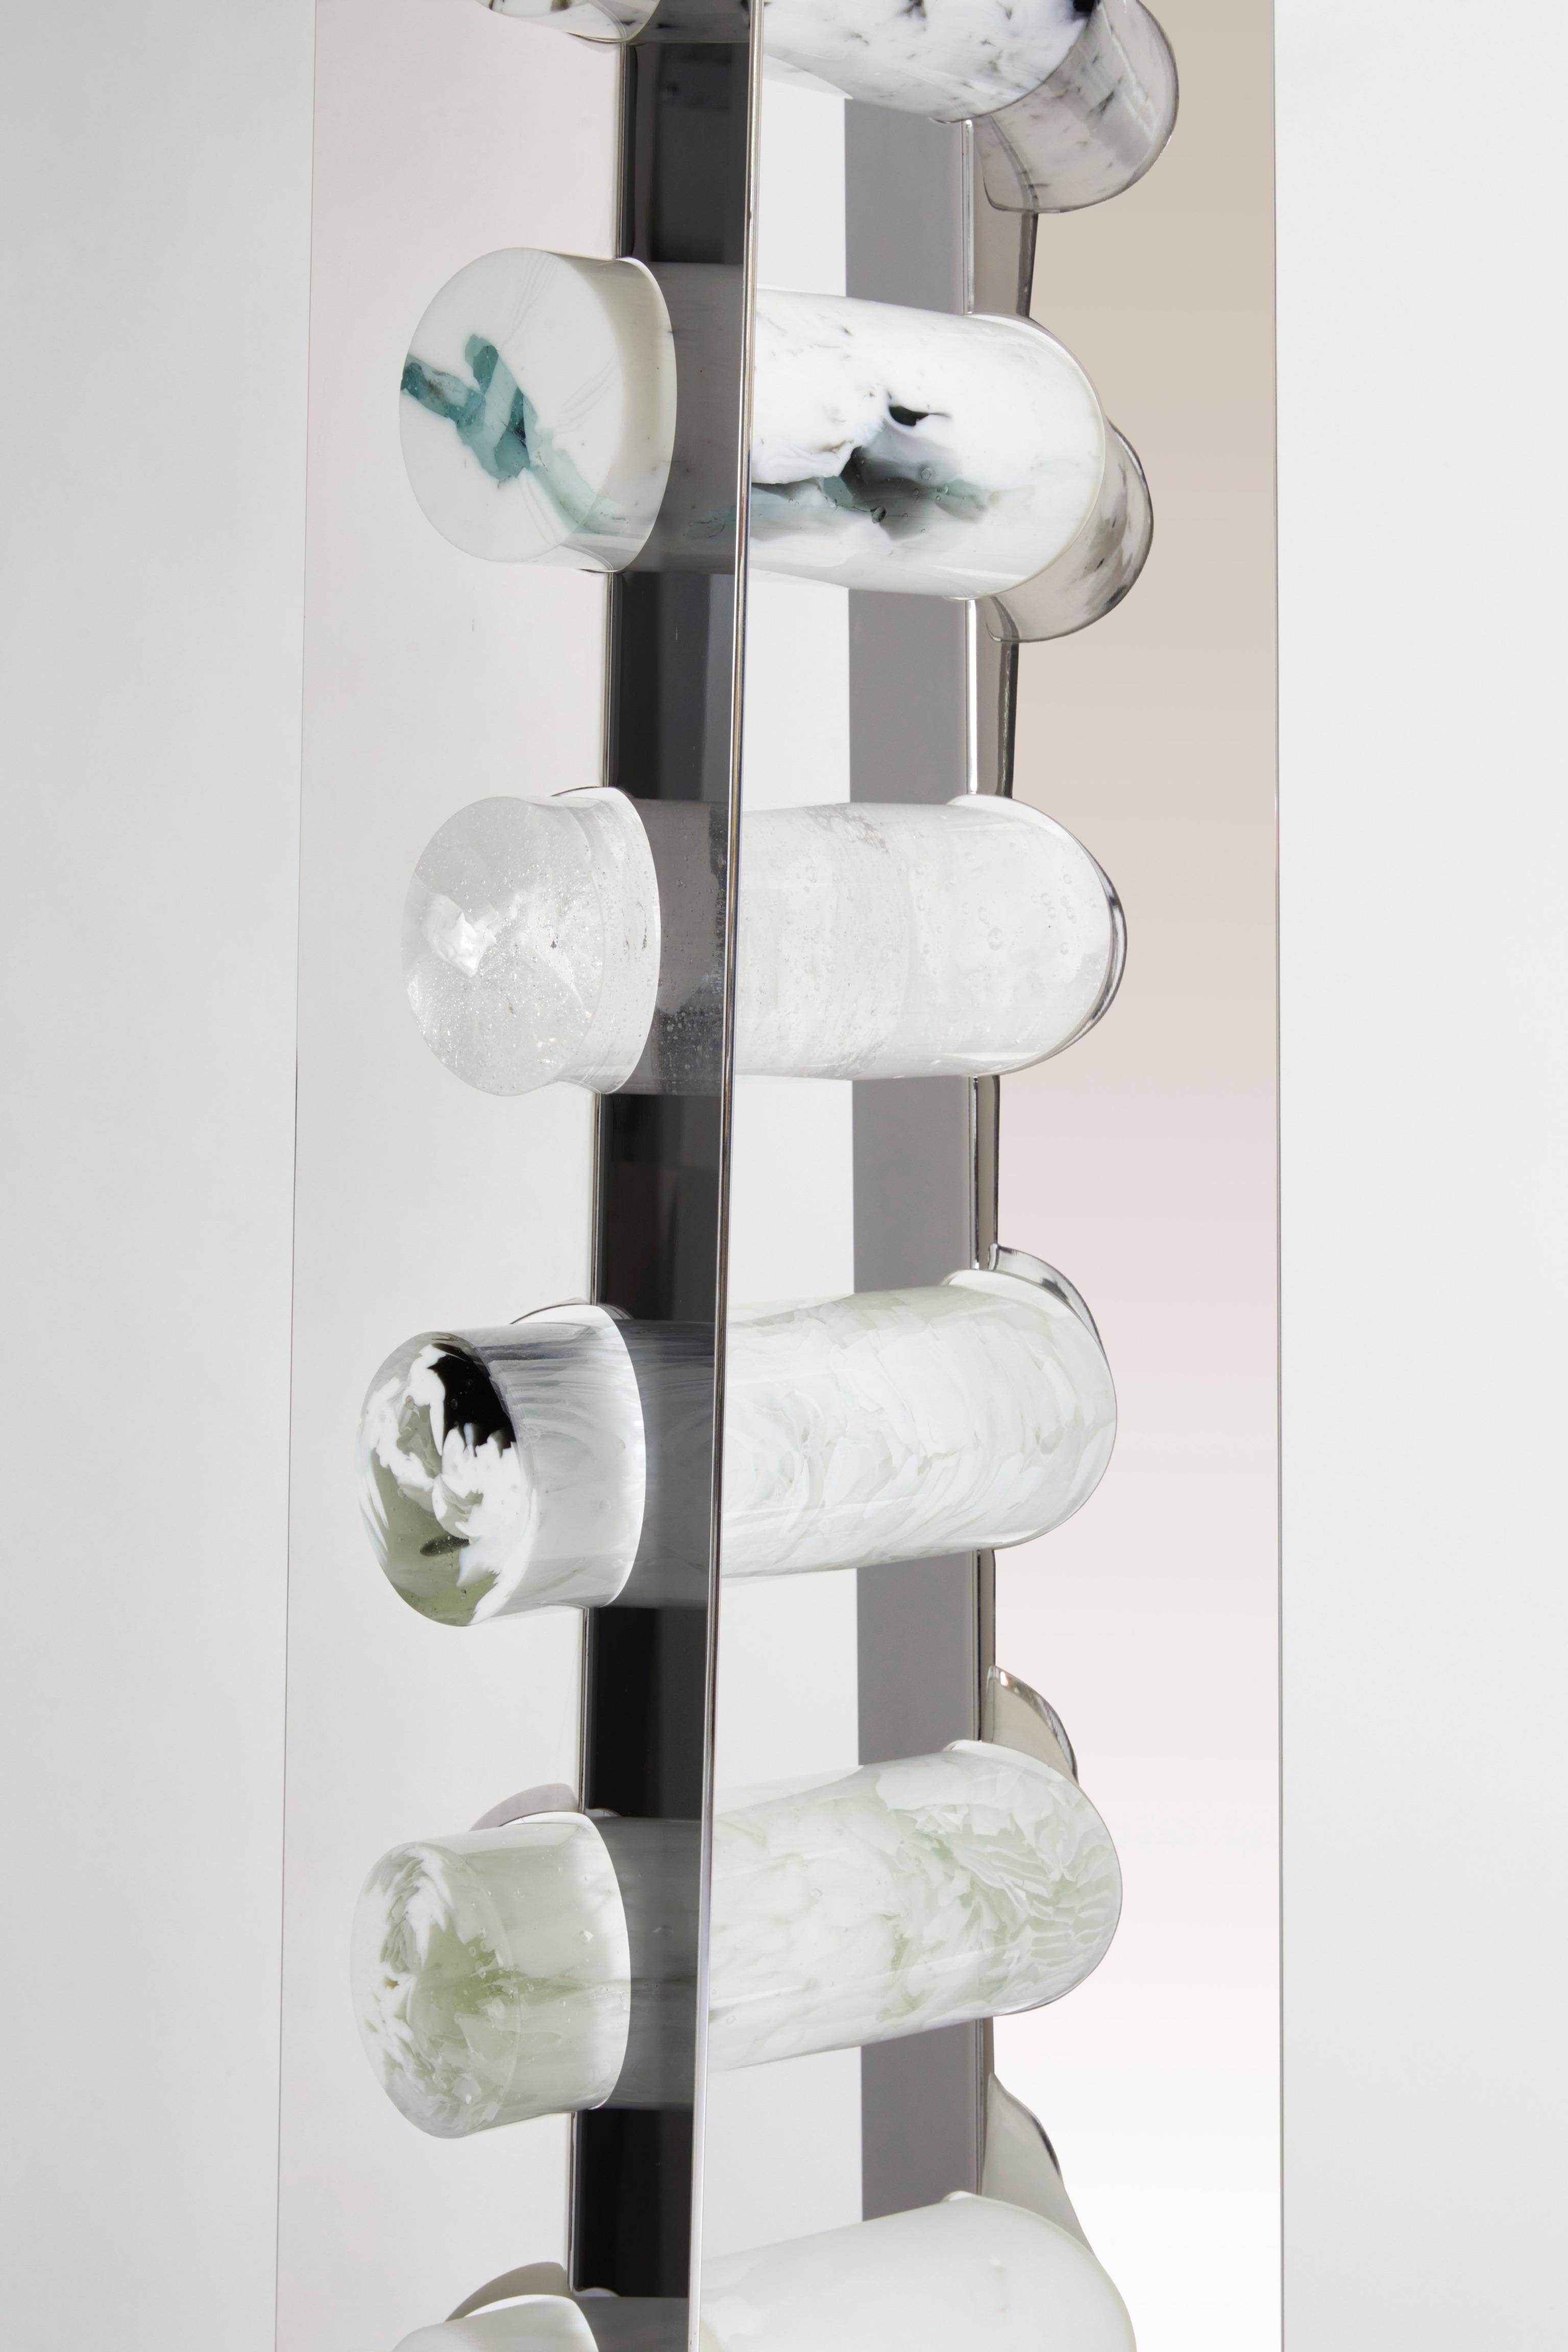 5°11 by Perrin & Perrin, Galerie Negropontes in Paris, France. Sculptural glass installation - One of a kind

Martine and Jacki Perrin sculpt together as one, forming a duo enriched by their individualities. For over a decade they have explored the